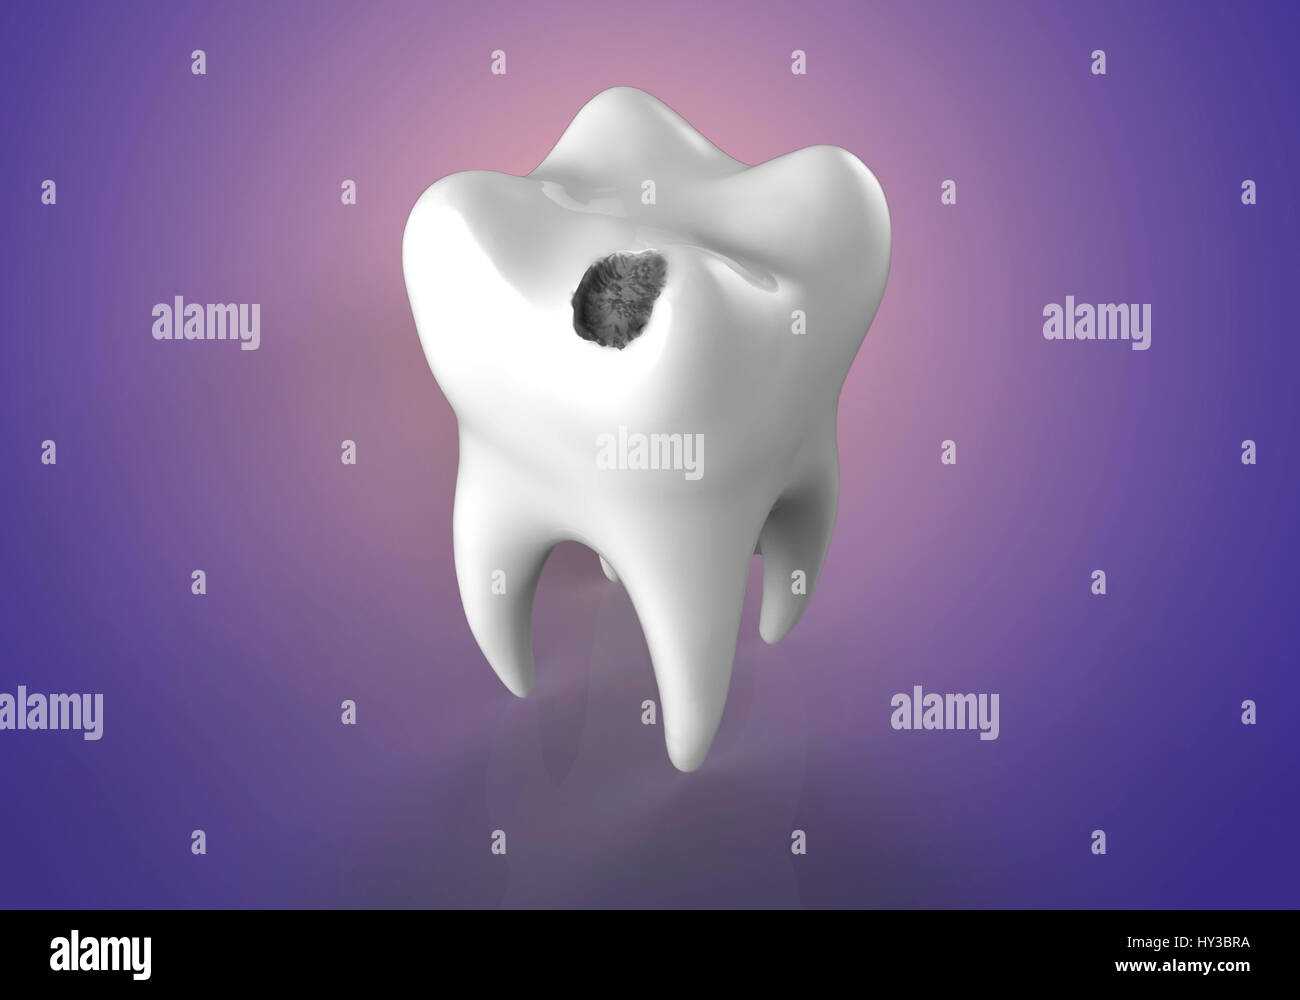 Tooth decay. Computer illustration of a tooth with a cavity. Stock Photo